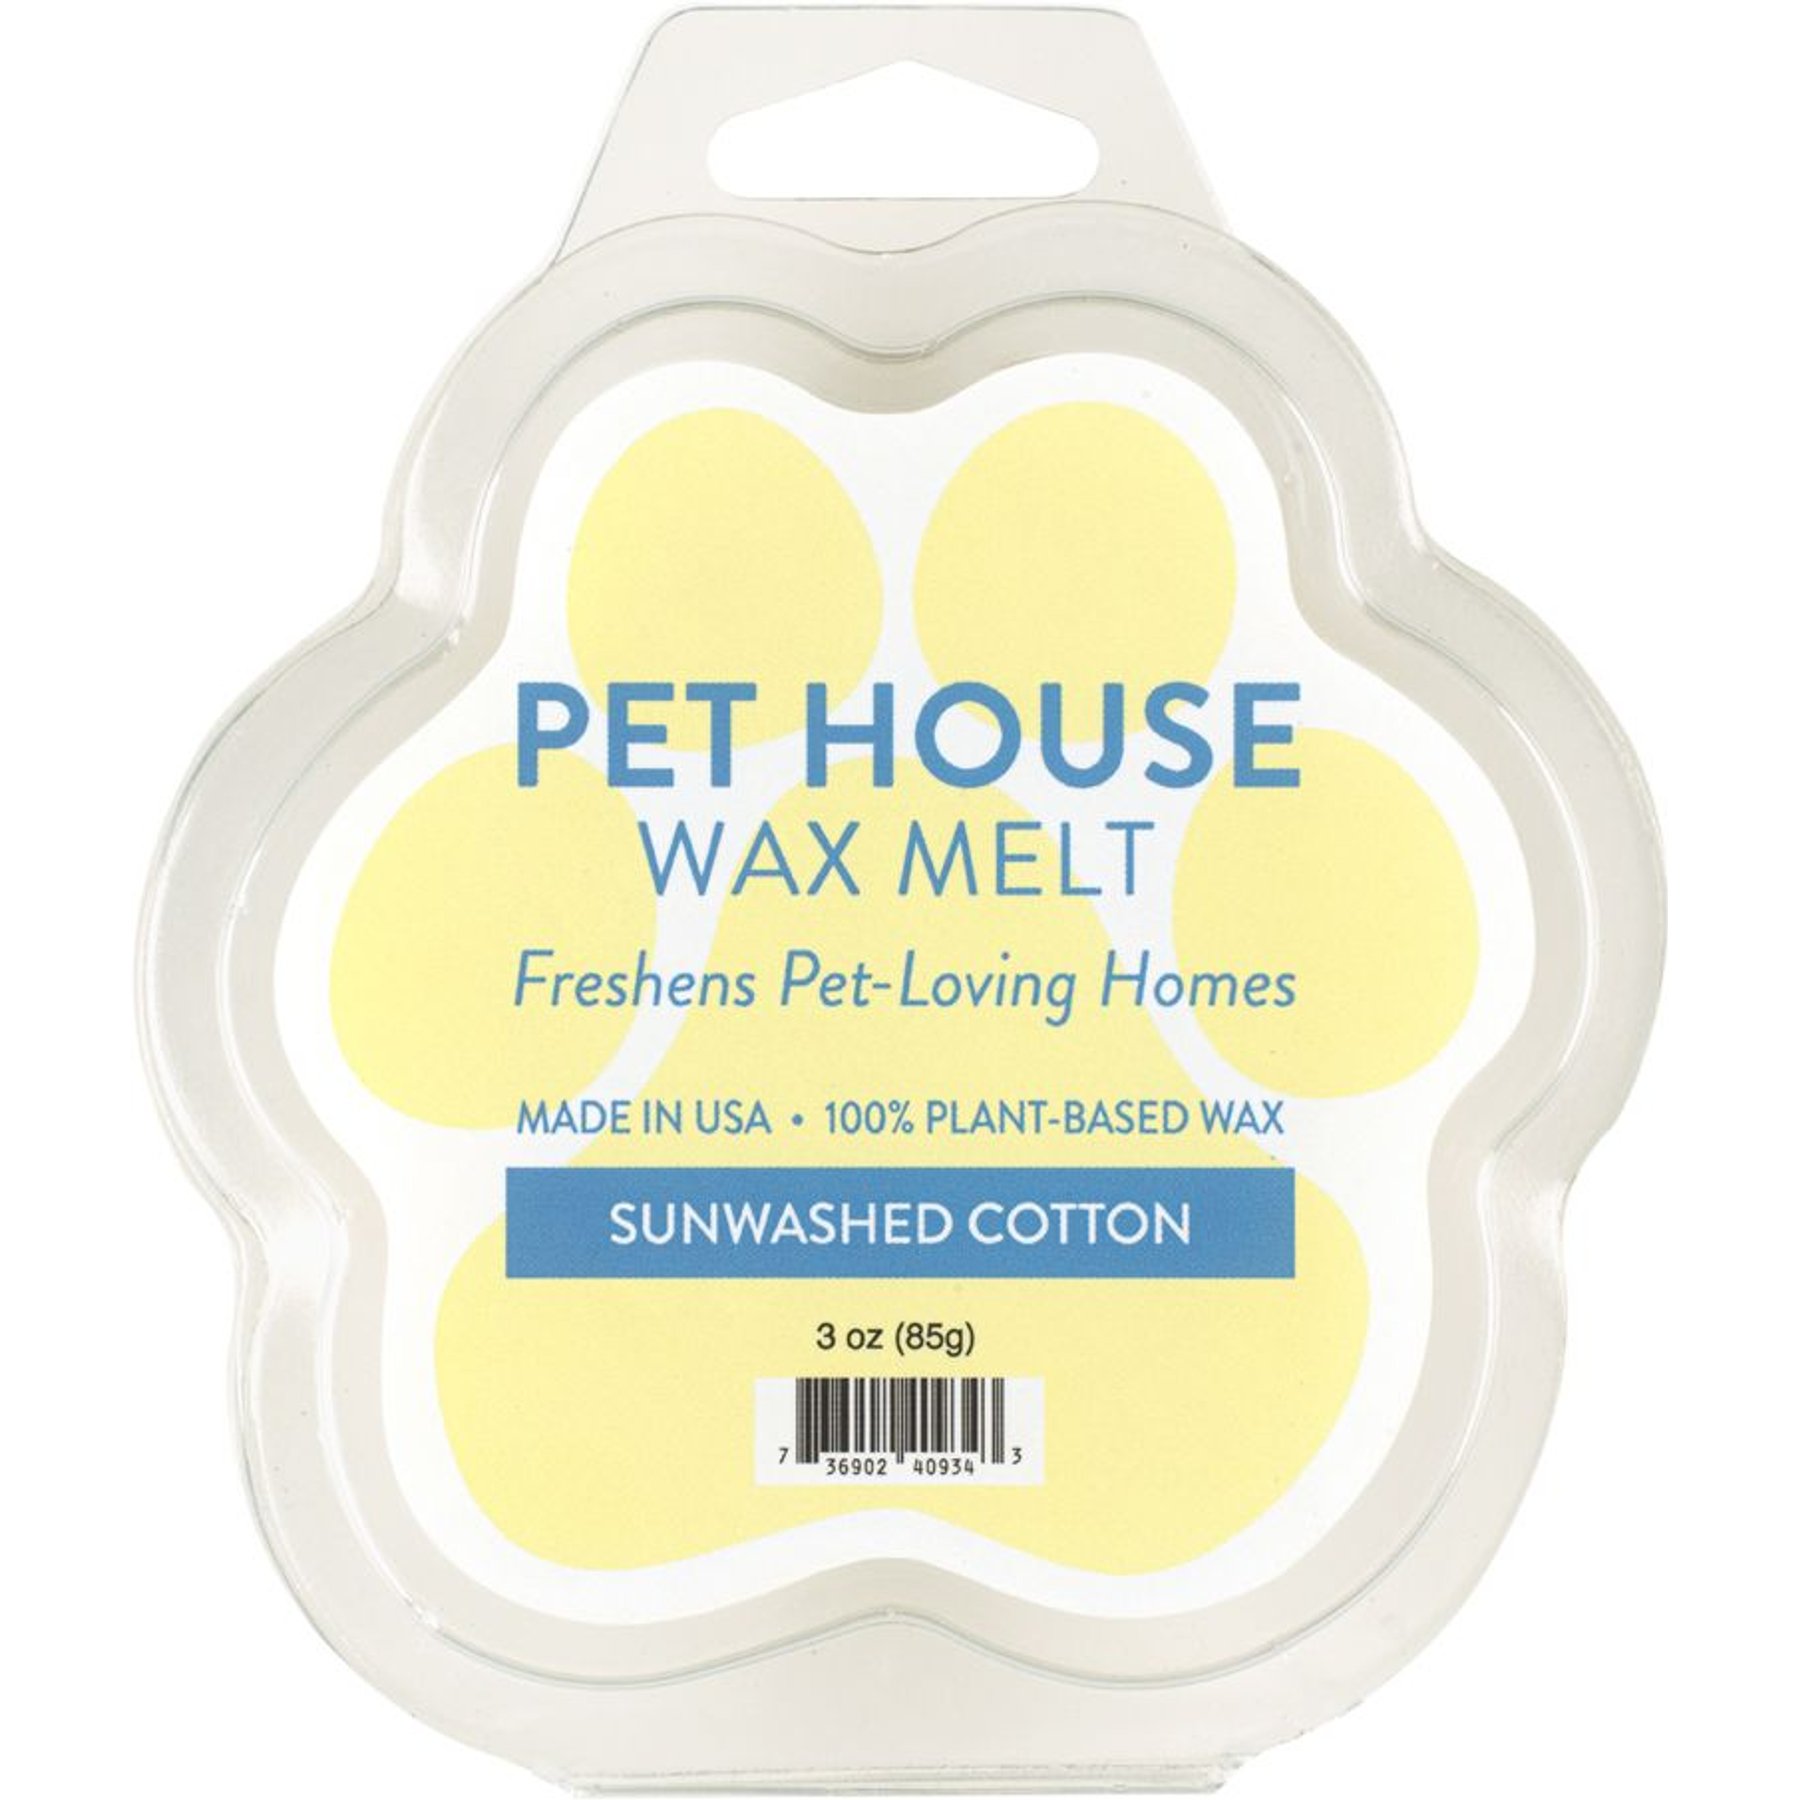 One Fur All 100% Natural Plant-Based Wax Melts, Pack of 2 by Pet House –  Long Lasting Pet Odor Eliminating Wax Melts Non-Toxic, Dye-Free Unique,  Made